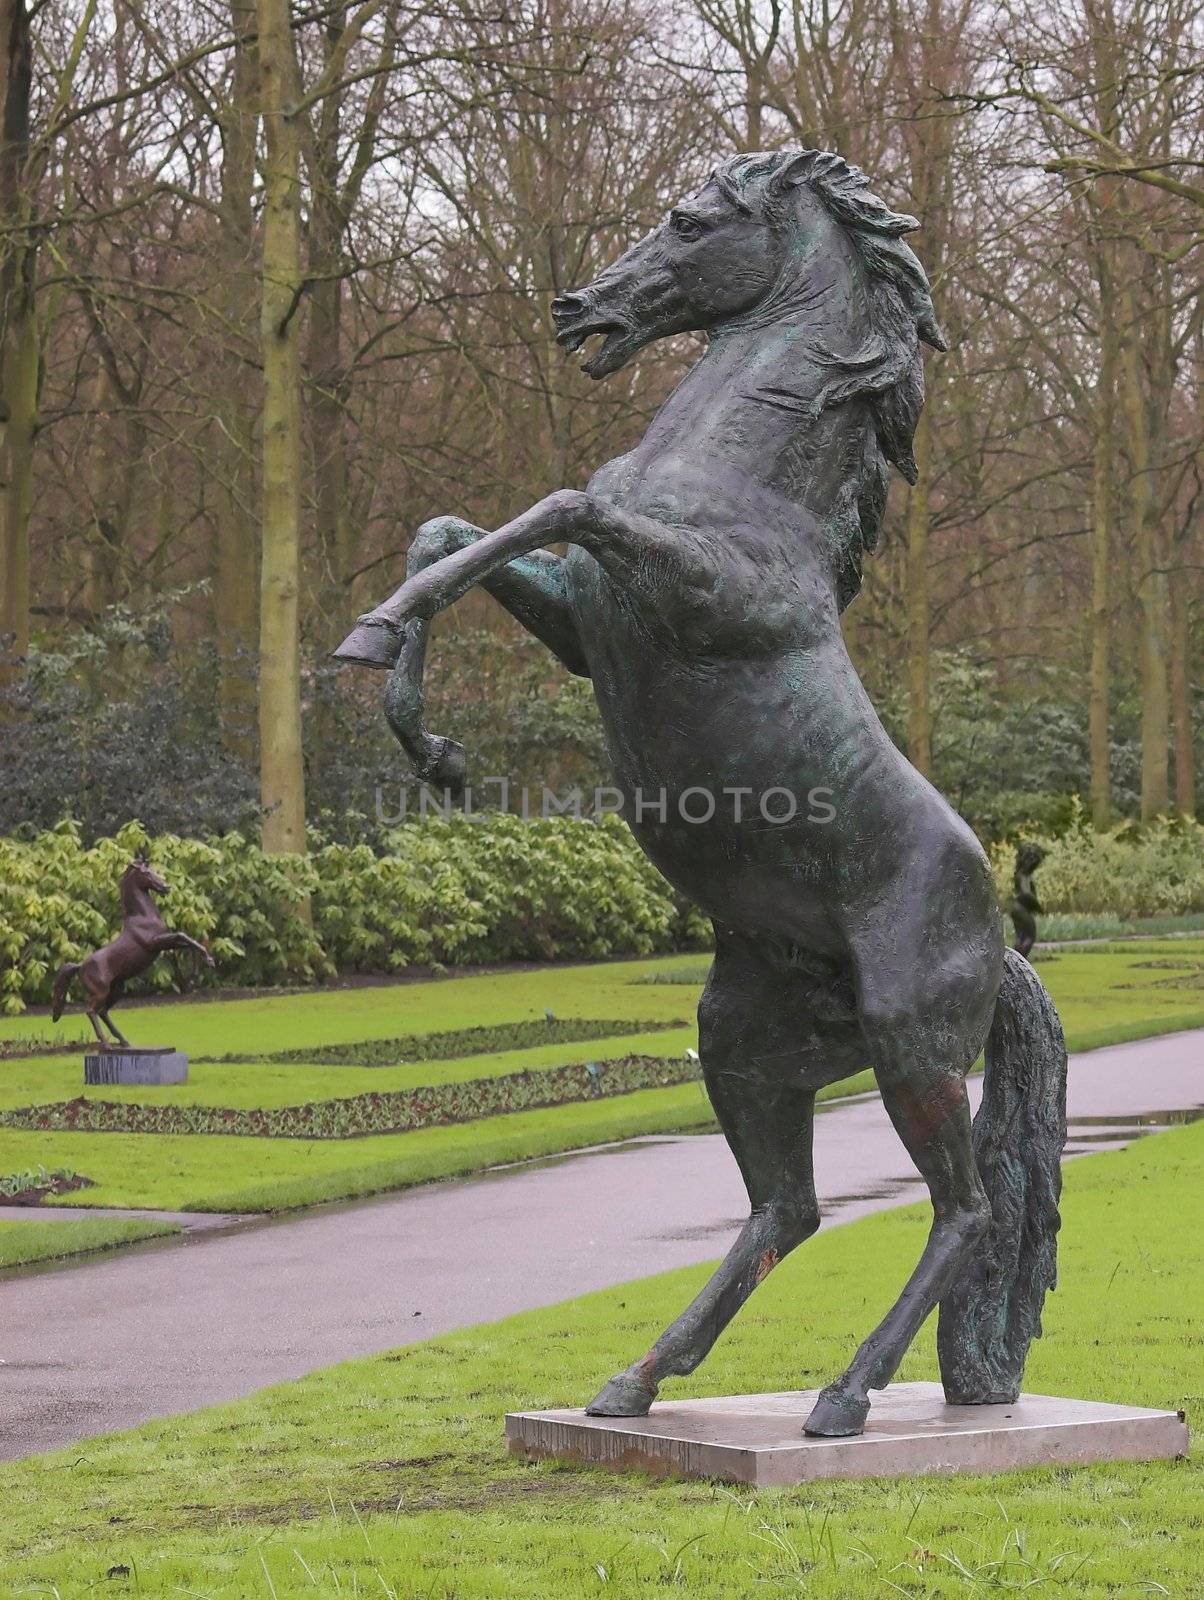 Statue of a horse standing on it's back legs in a park